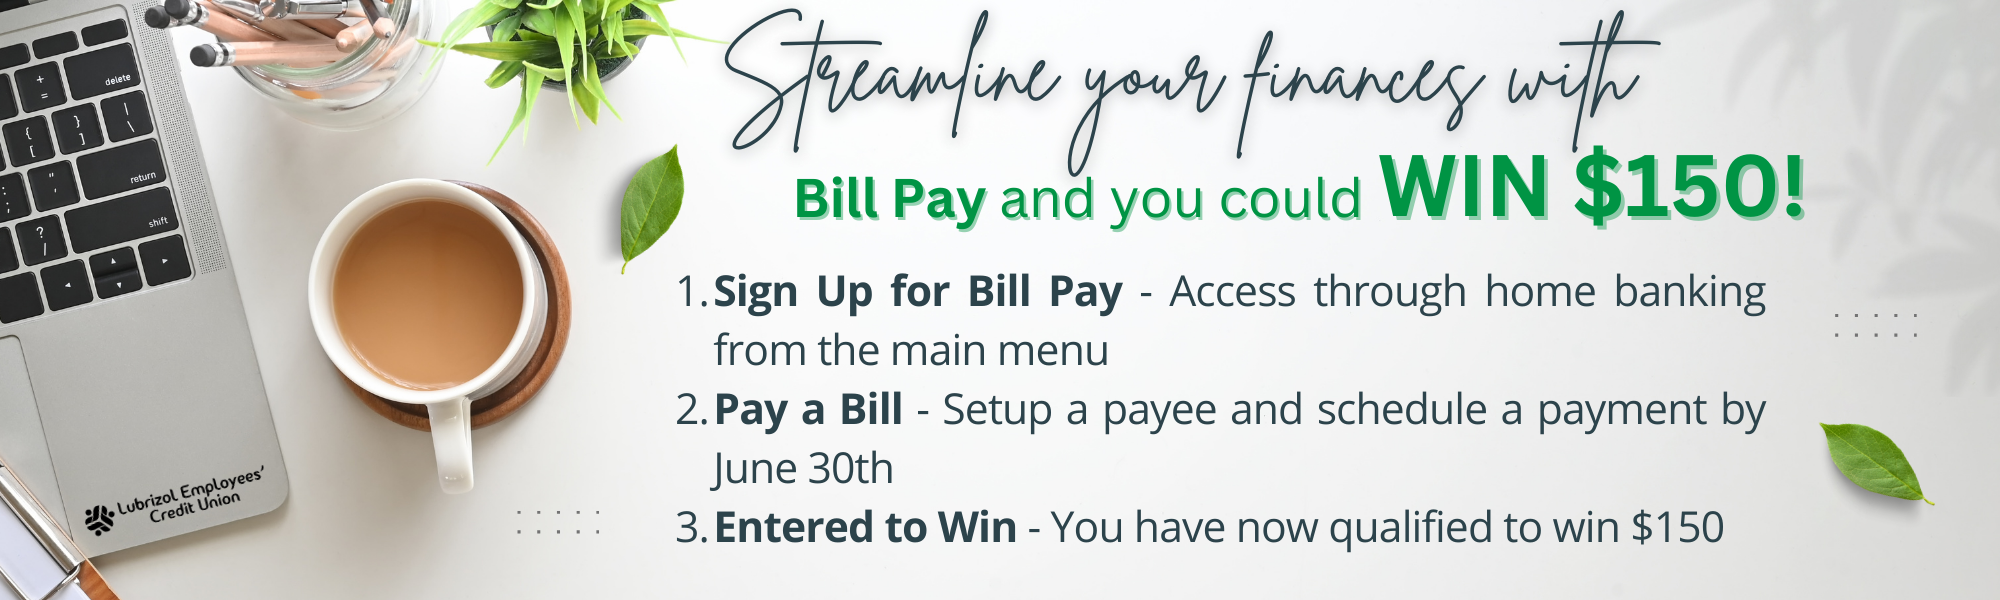 Setup bill pay, pay a bill and be entered to win $150.